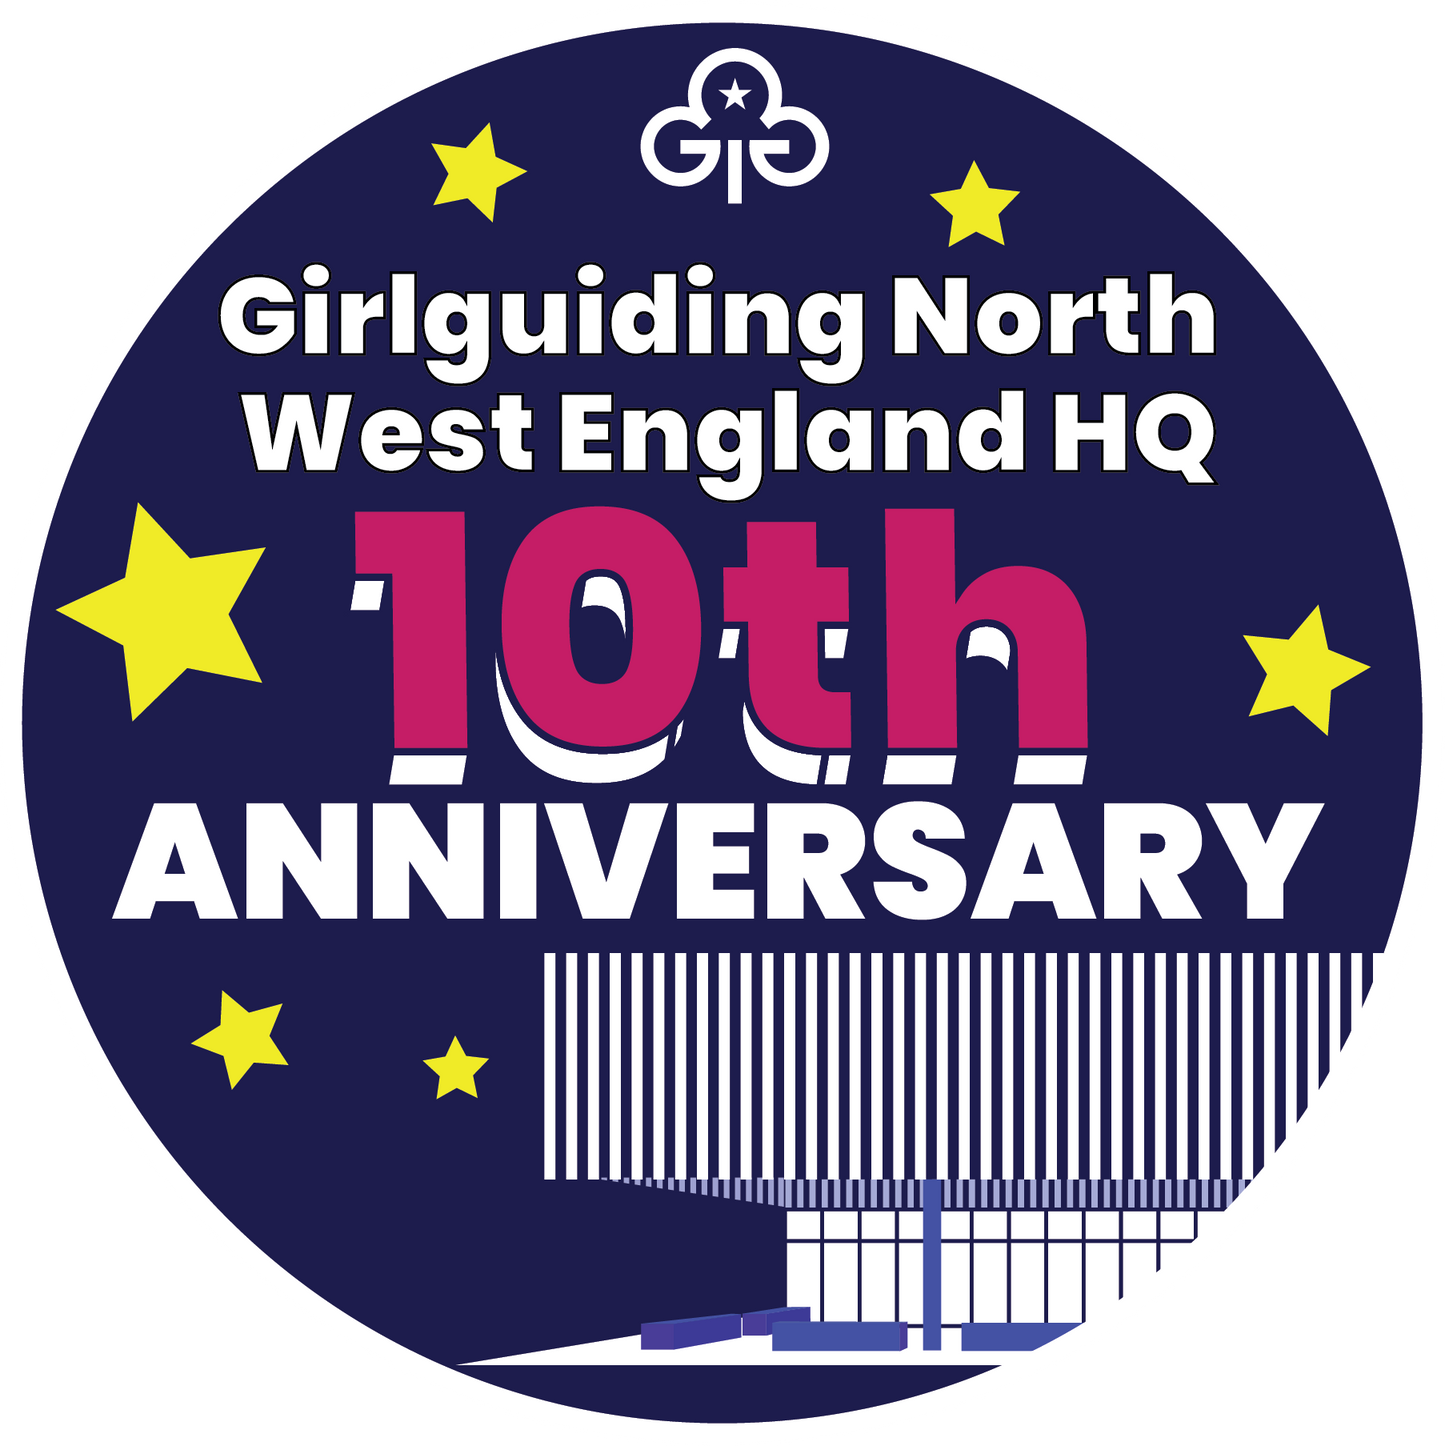 10th Anniversary of Girlguiding North West England HQ